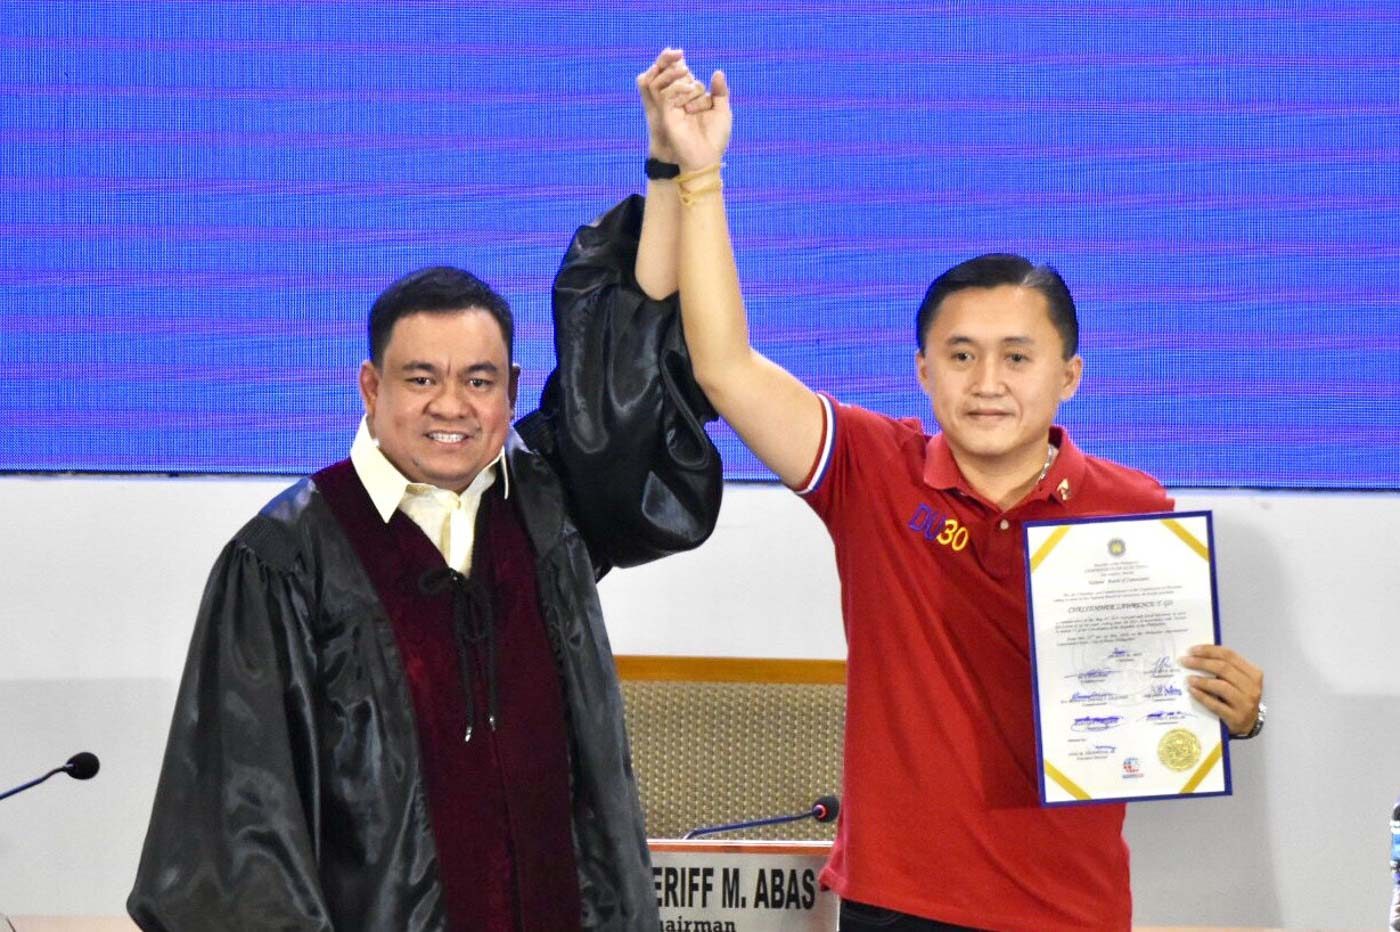 FROM AID TO SENATOR. Long-time assistant Christopher Bong Go is proclaimed senator. Photo by Angie de Silva/Rappler 